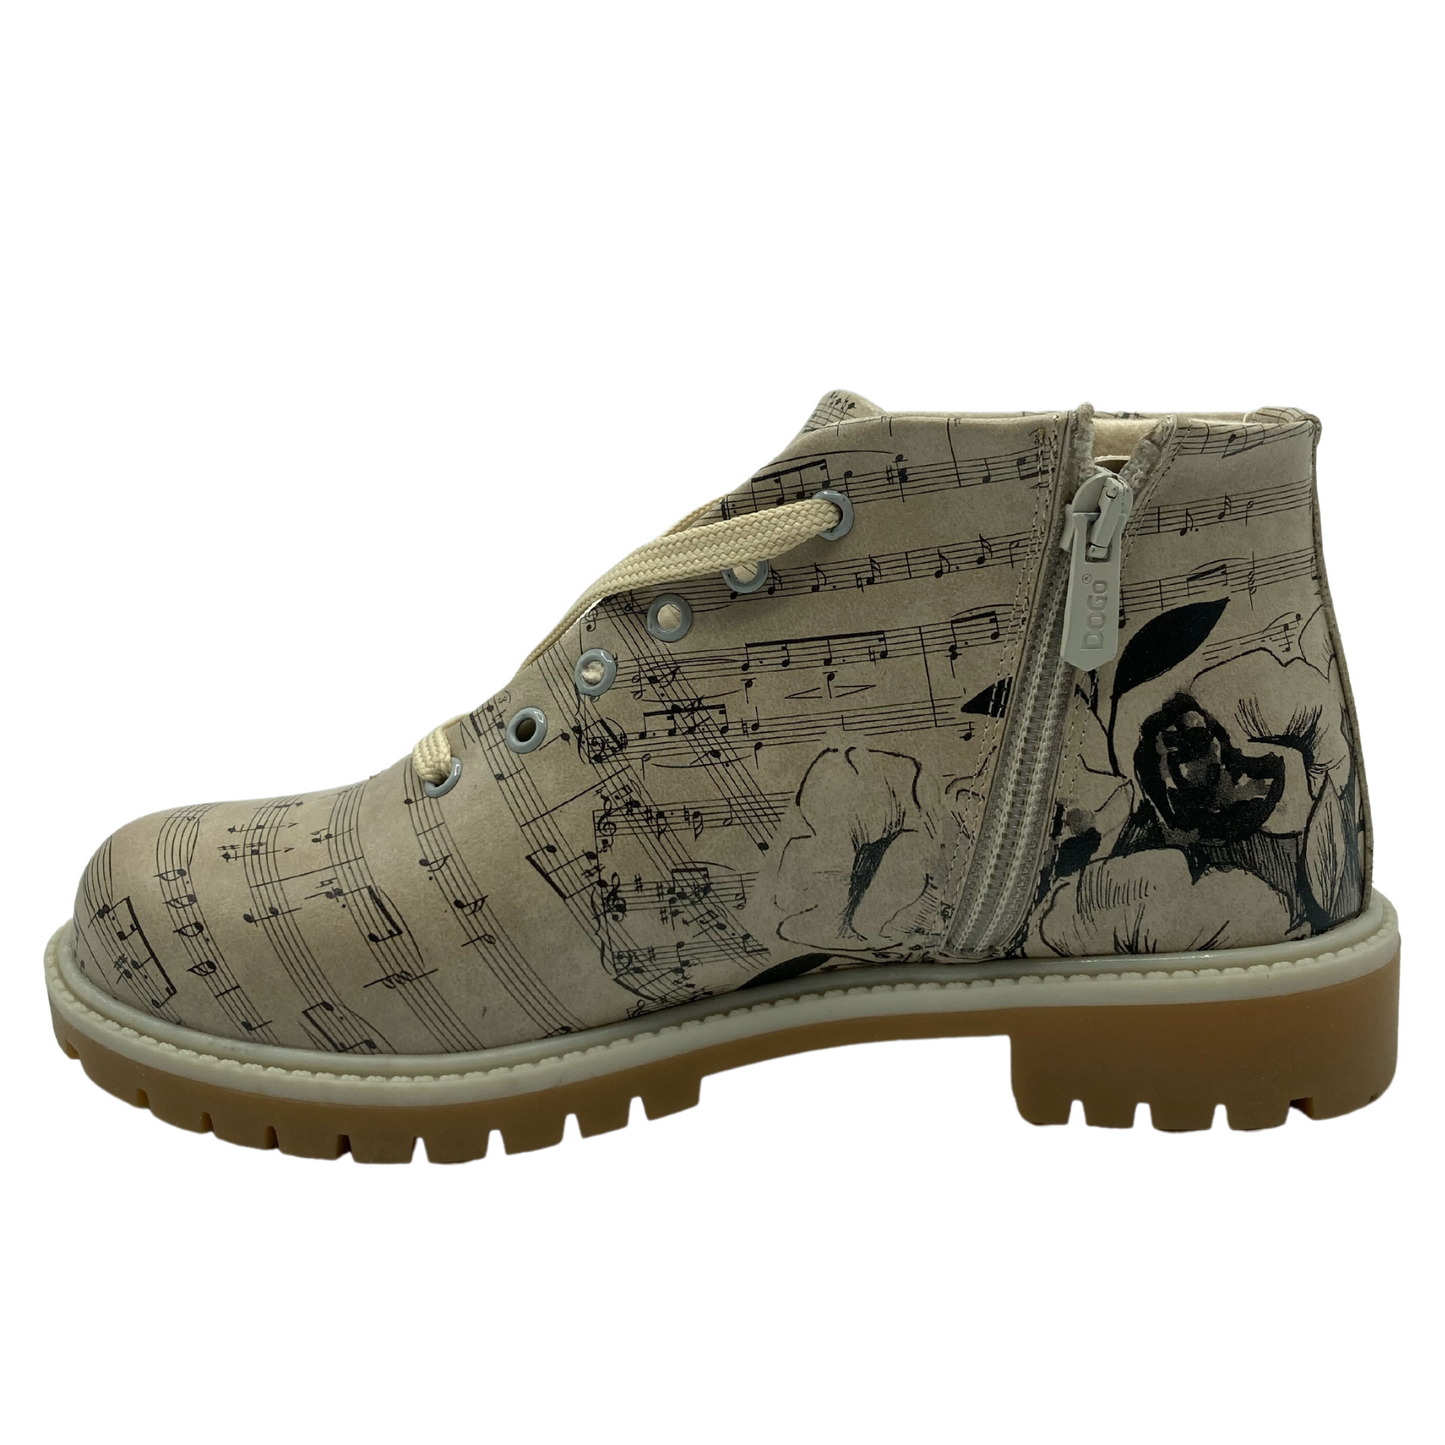 Left facing view of vegan leather short boot with sheet music pattern on upper and side zipper closure